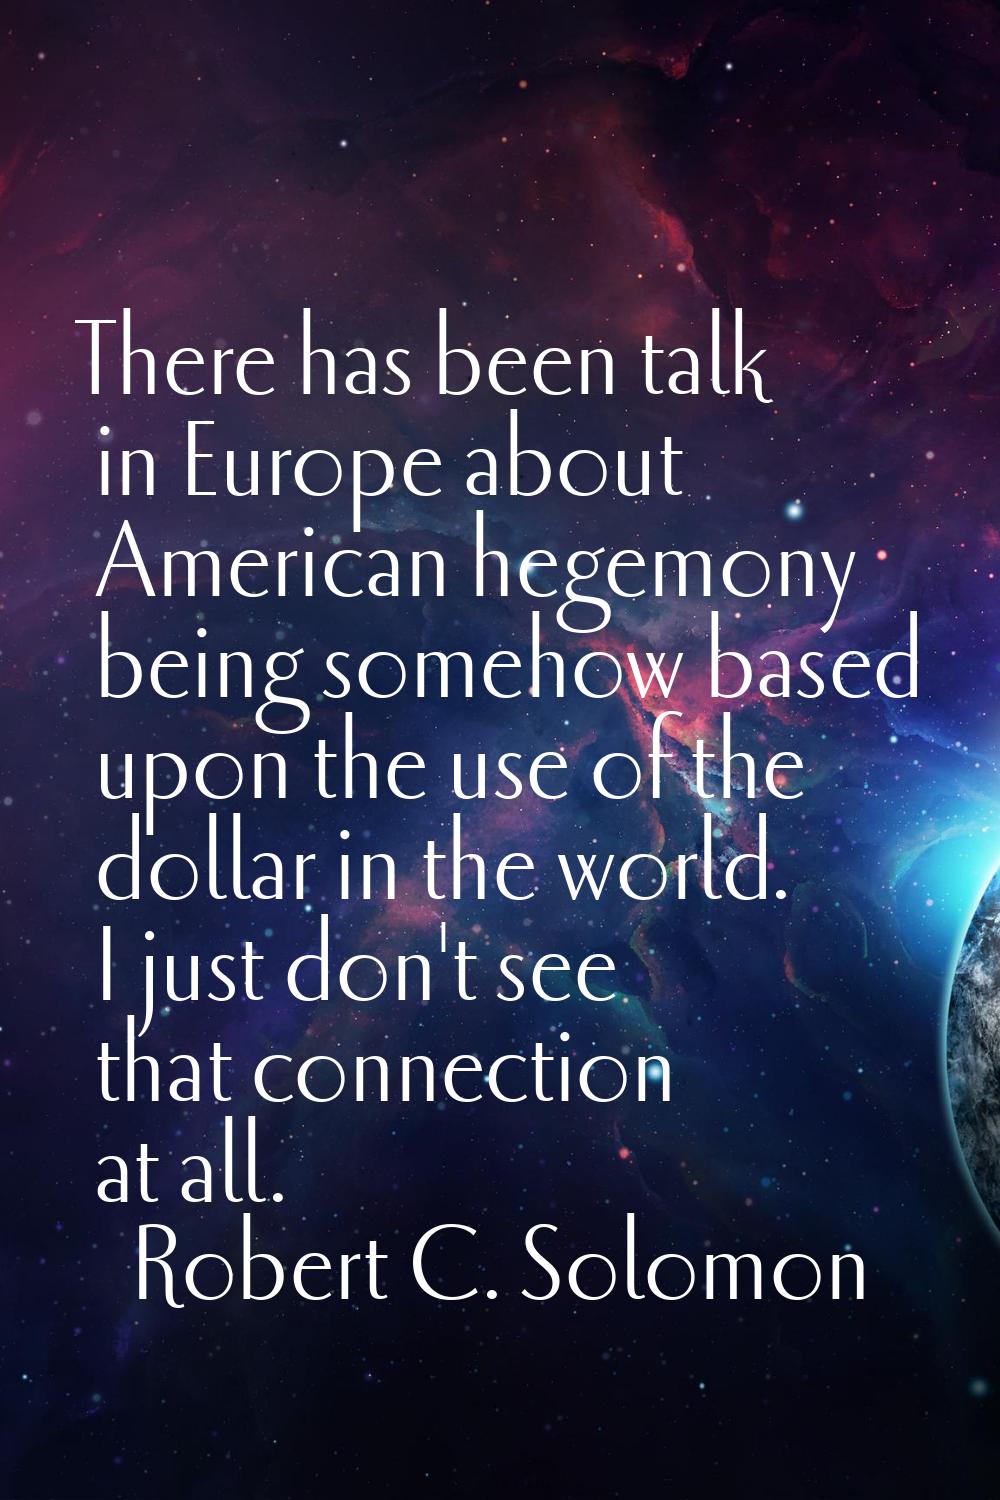 There has been talk in Europe about American hegemony being somehow based upon the use of the dolla